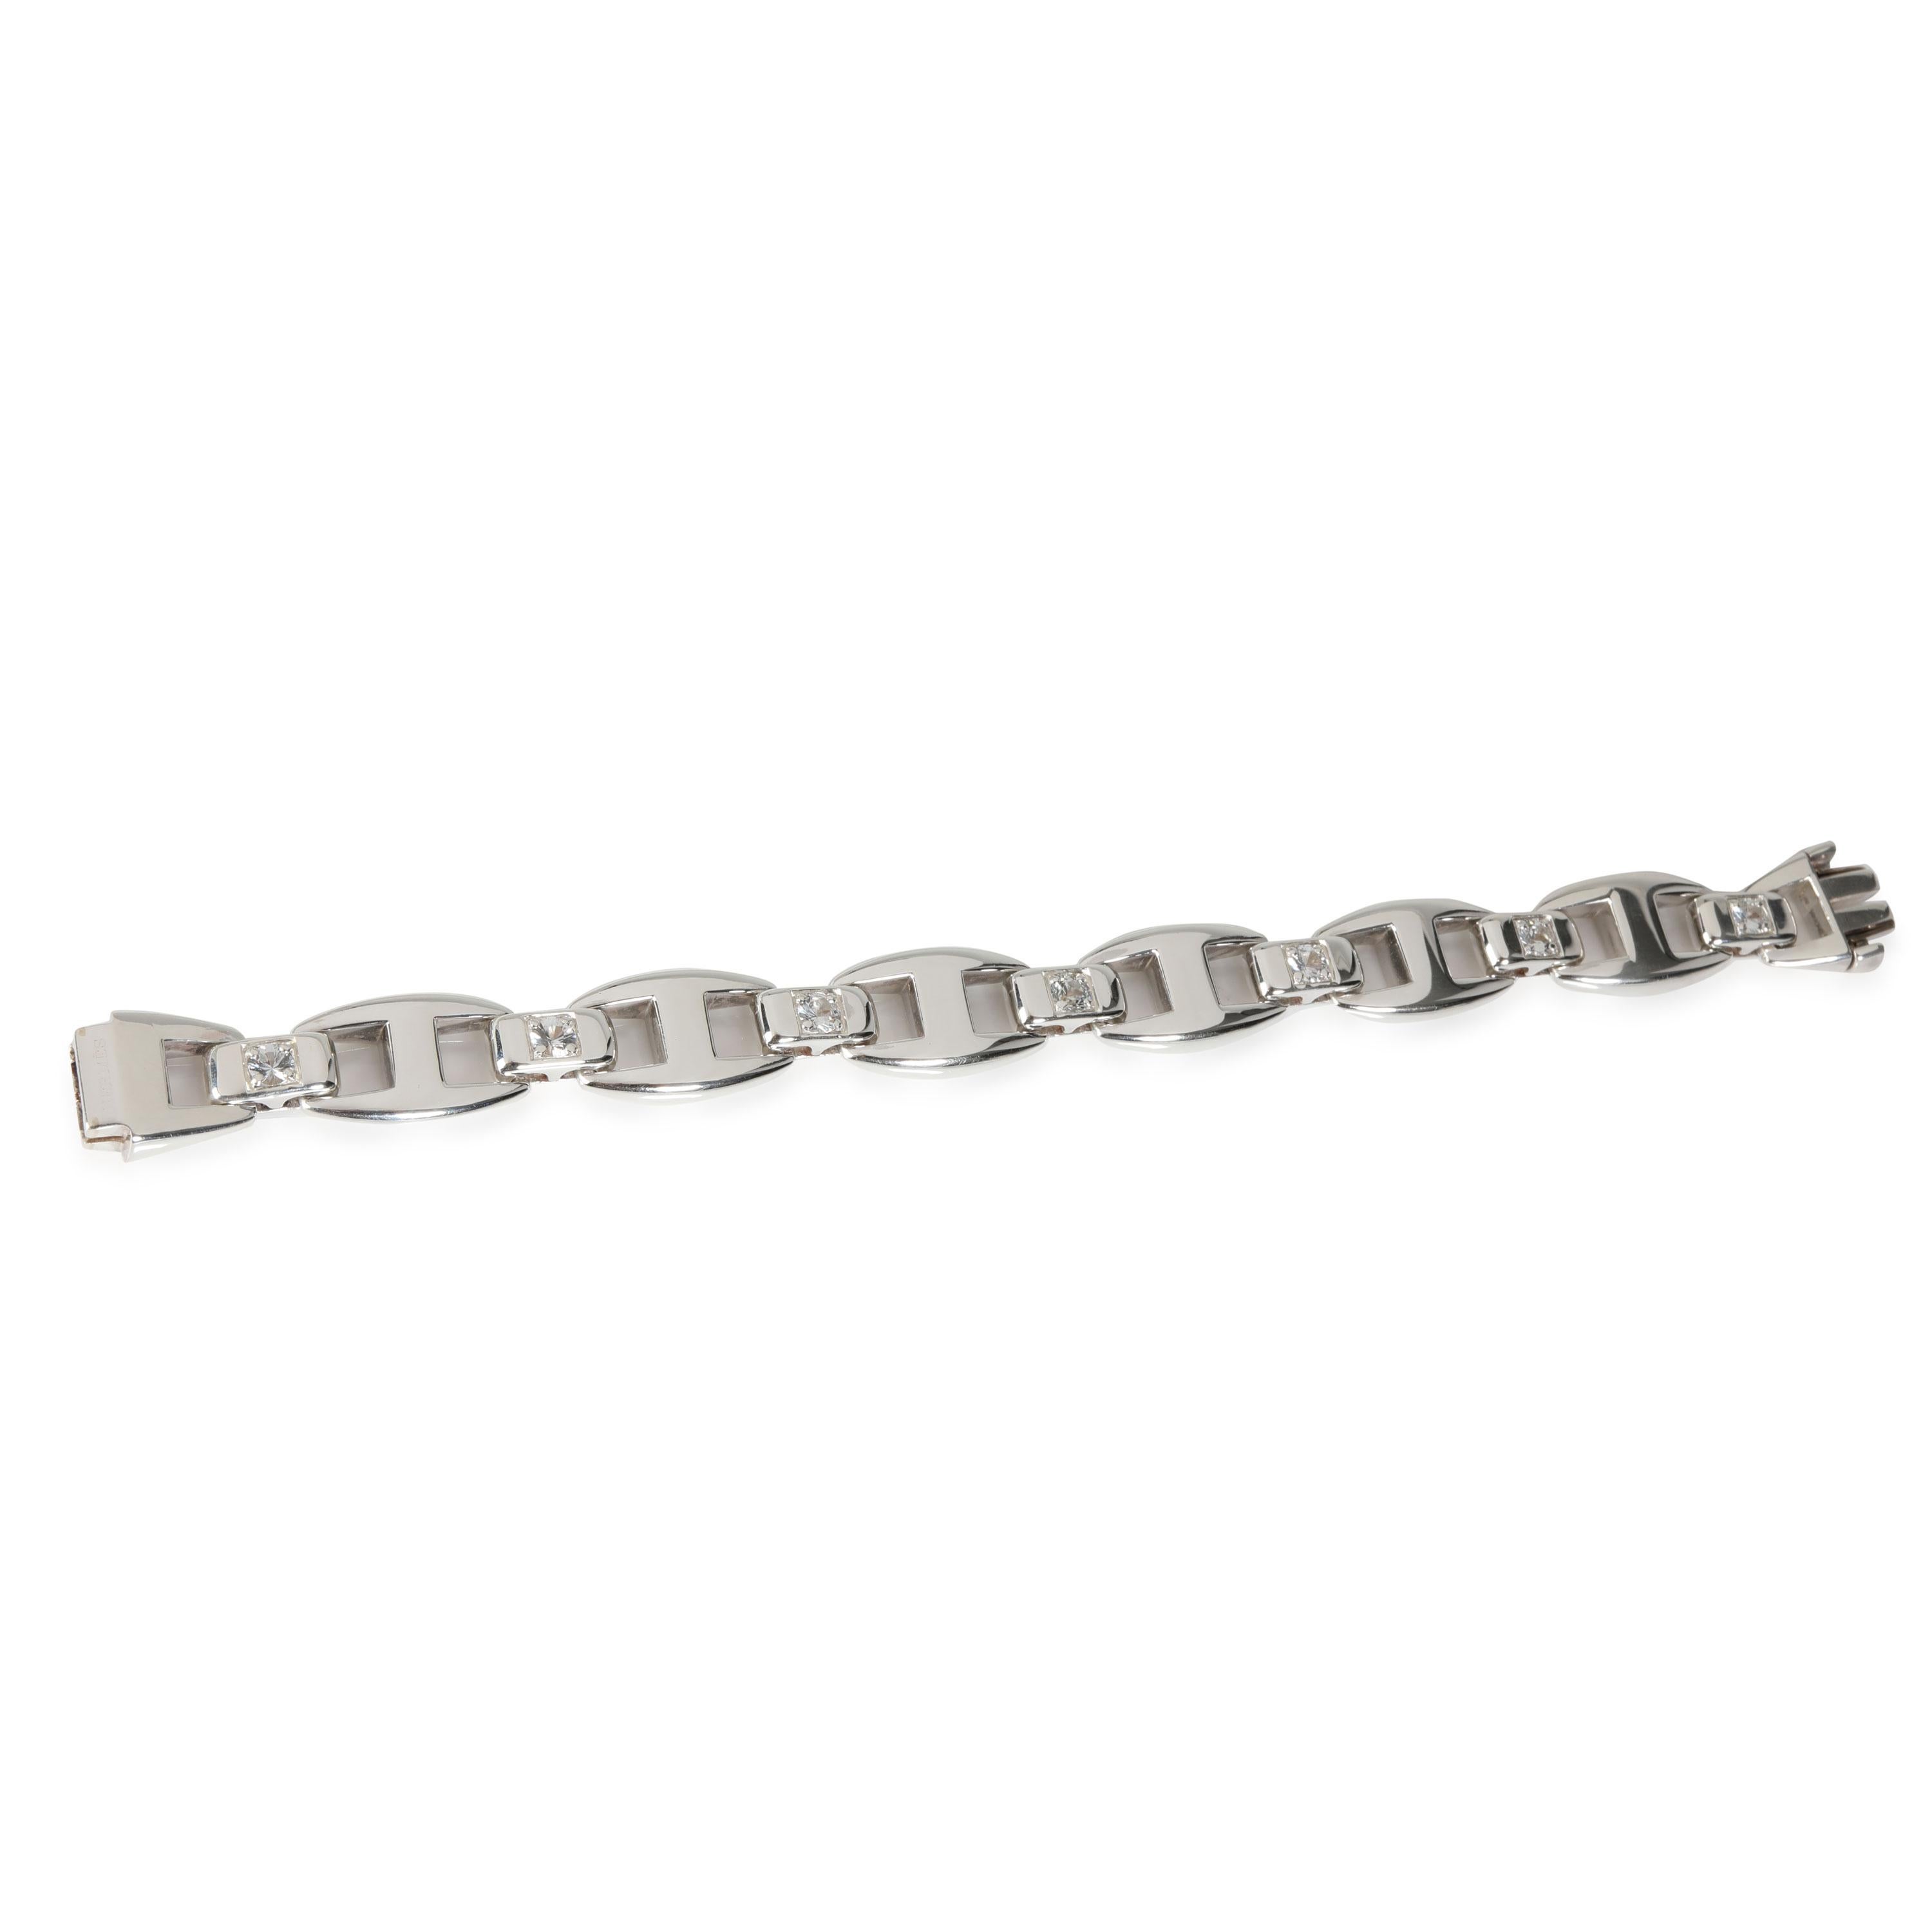 Hermès Cassiopee Sapphire Link Bracelet in  Sterling Silver

PRIMARY DETAILS
SKU: 115207
Listing Title: Hermès Cassiopee Sapphire Link Bracelet in  Sterling Silver
Condition Description: Retails for 2250 USD. In excellent condition and recently